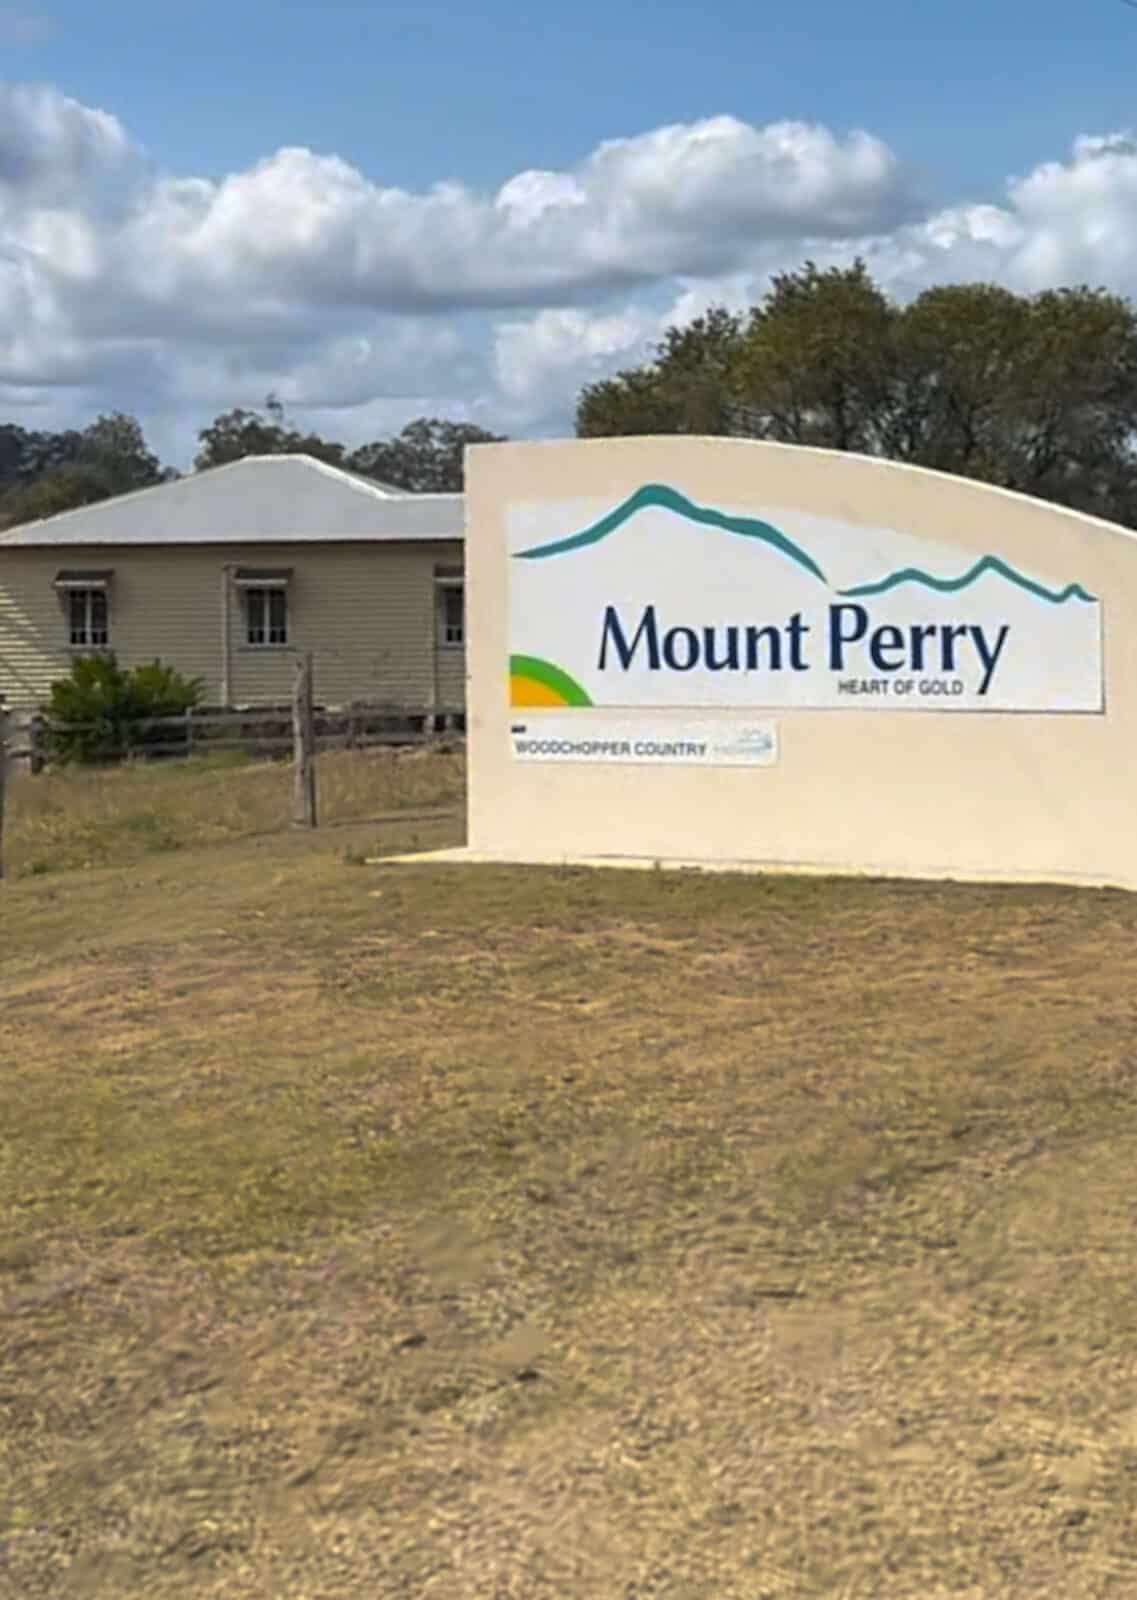 Mount Perry sign